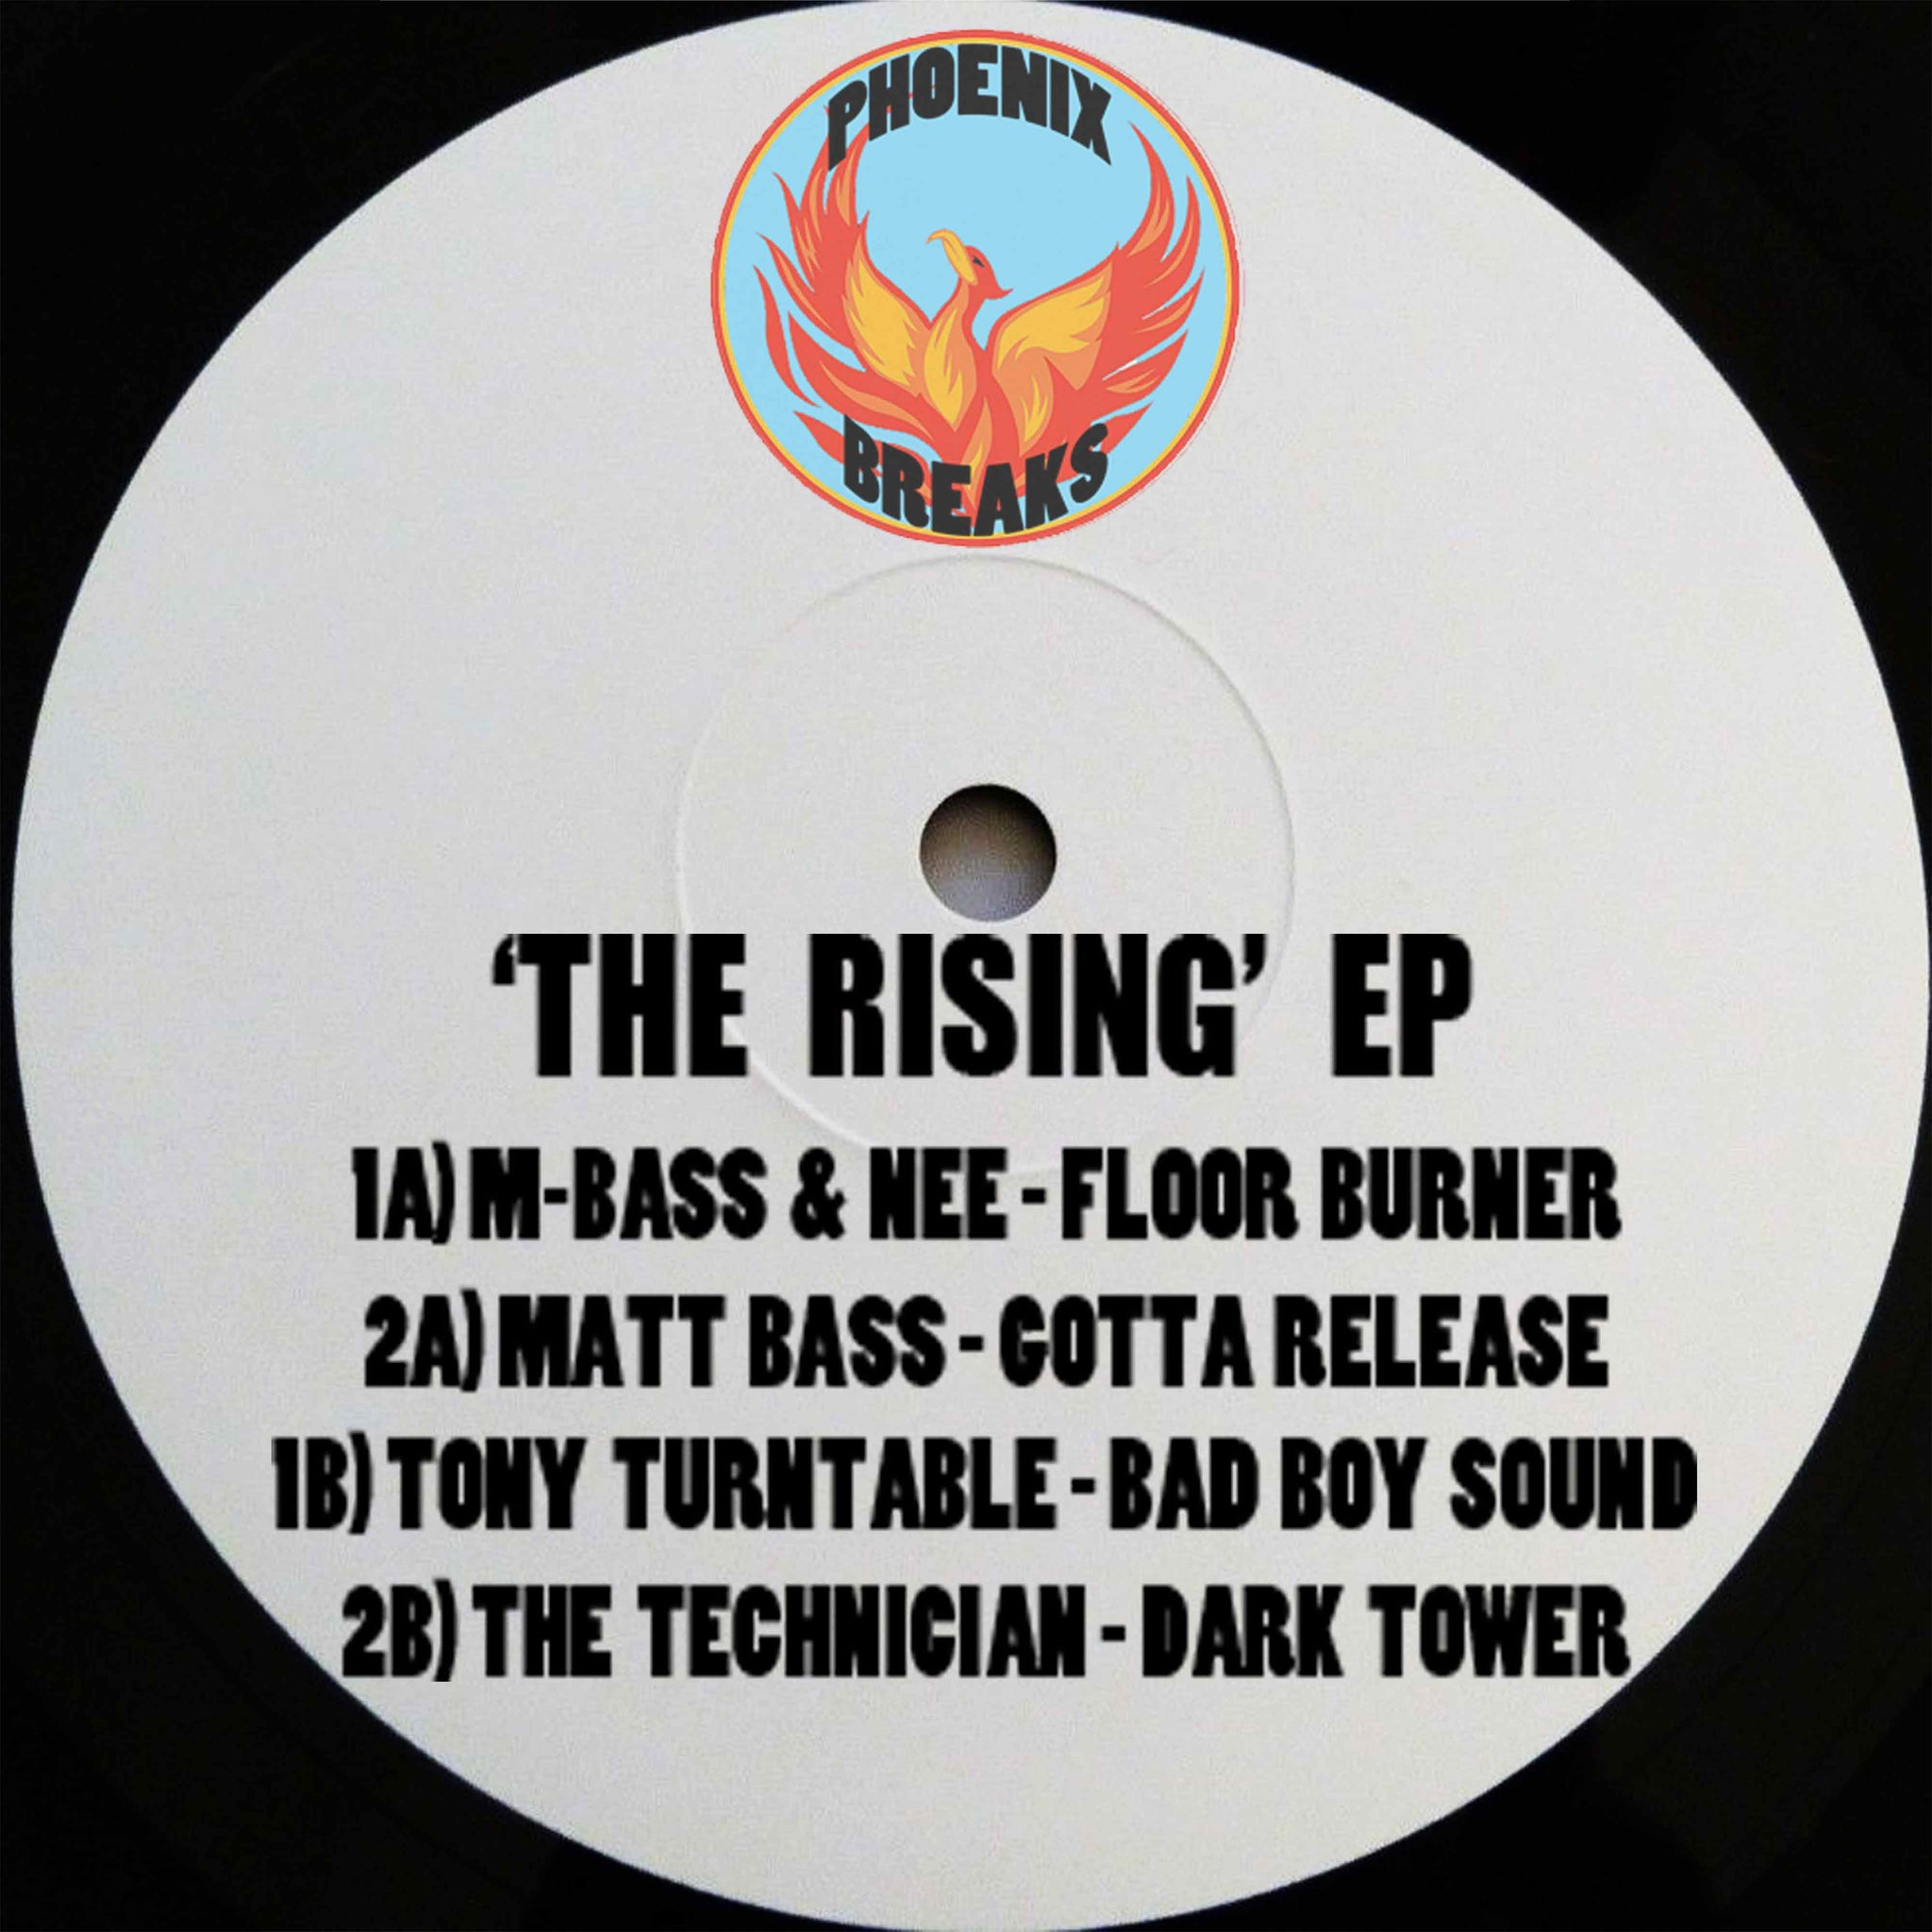 VARIOUS 'THE RISING EP' 12"